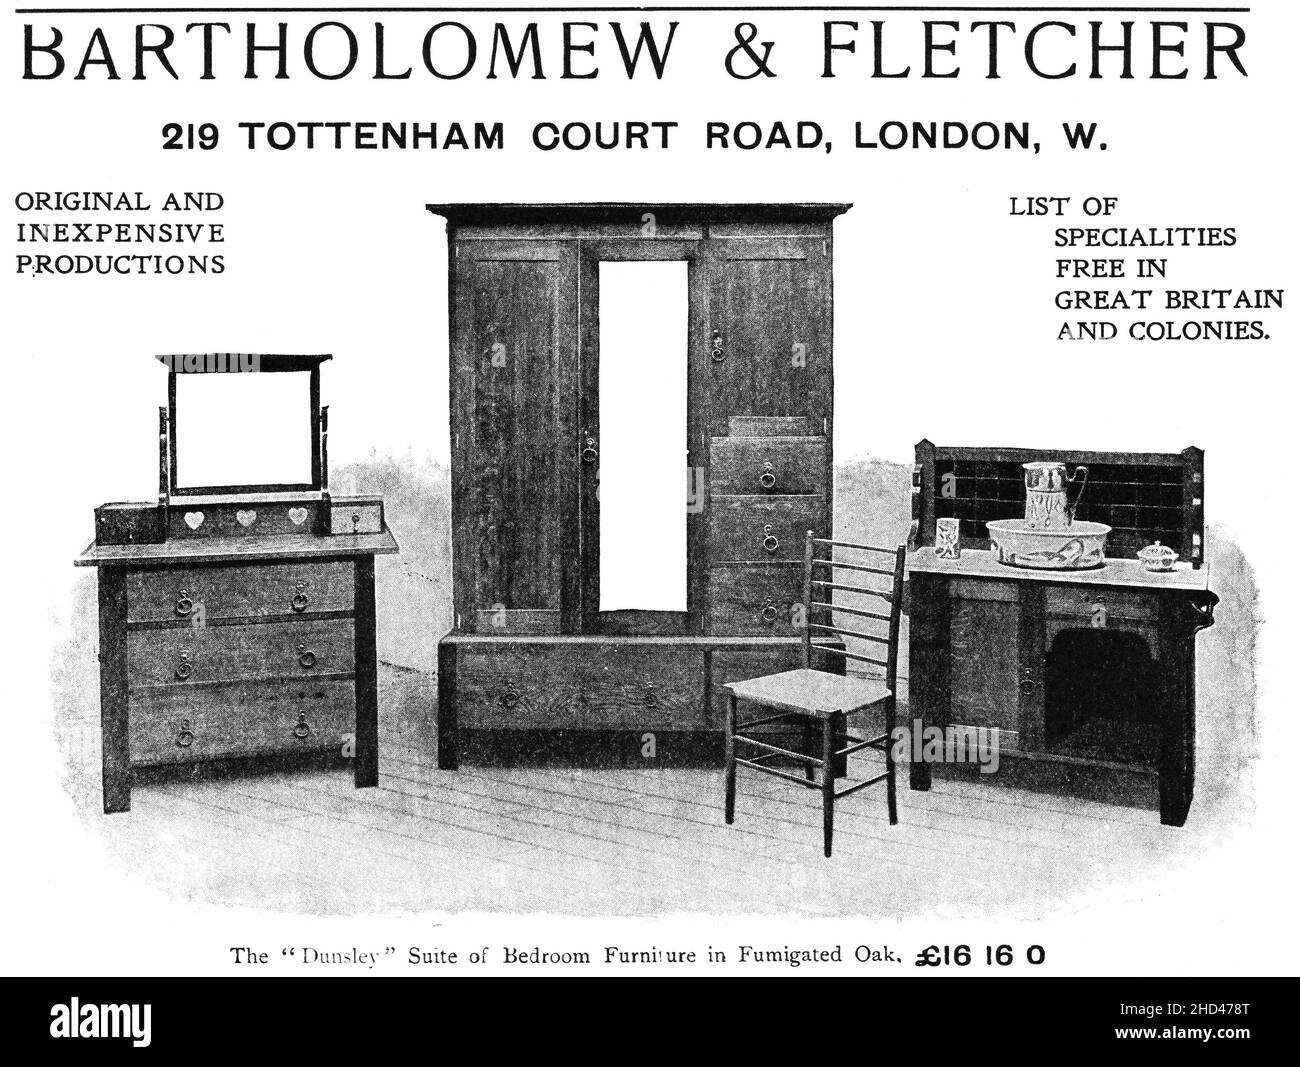 A 1902 advertisement promoting the products of Bartholomew & Fletcher of 219 Tottenham Court, London. Home furnishings. “Original and Inexpensive Productions”. The advertisement features an illustration of “The ‘Dunsley’ suite of bedroom furniture in fumigated oak”. Stock Photo